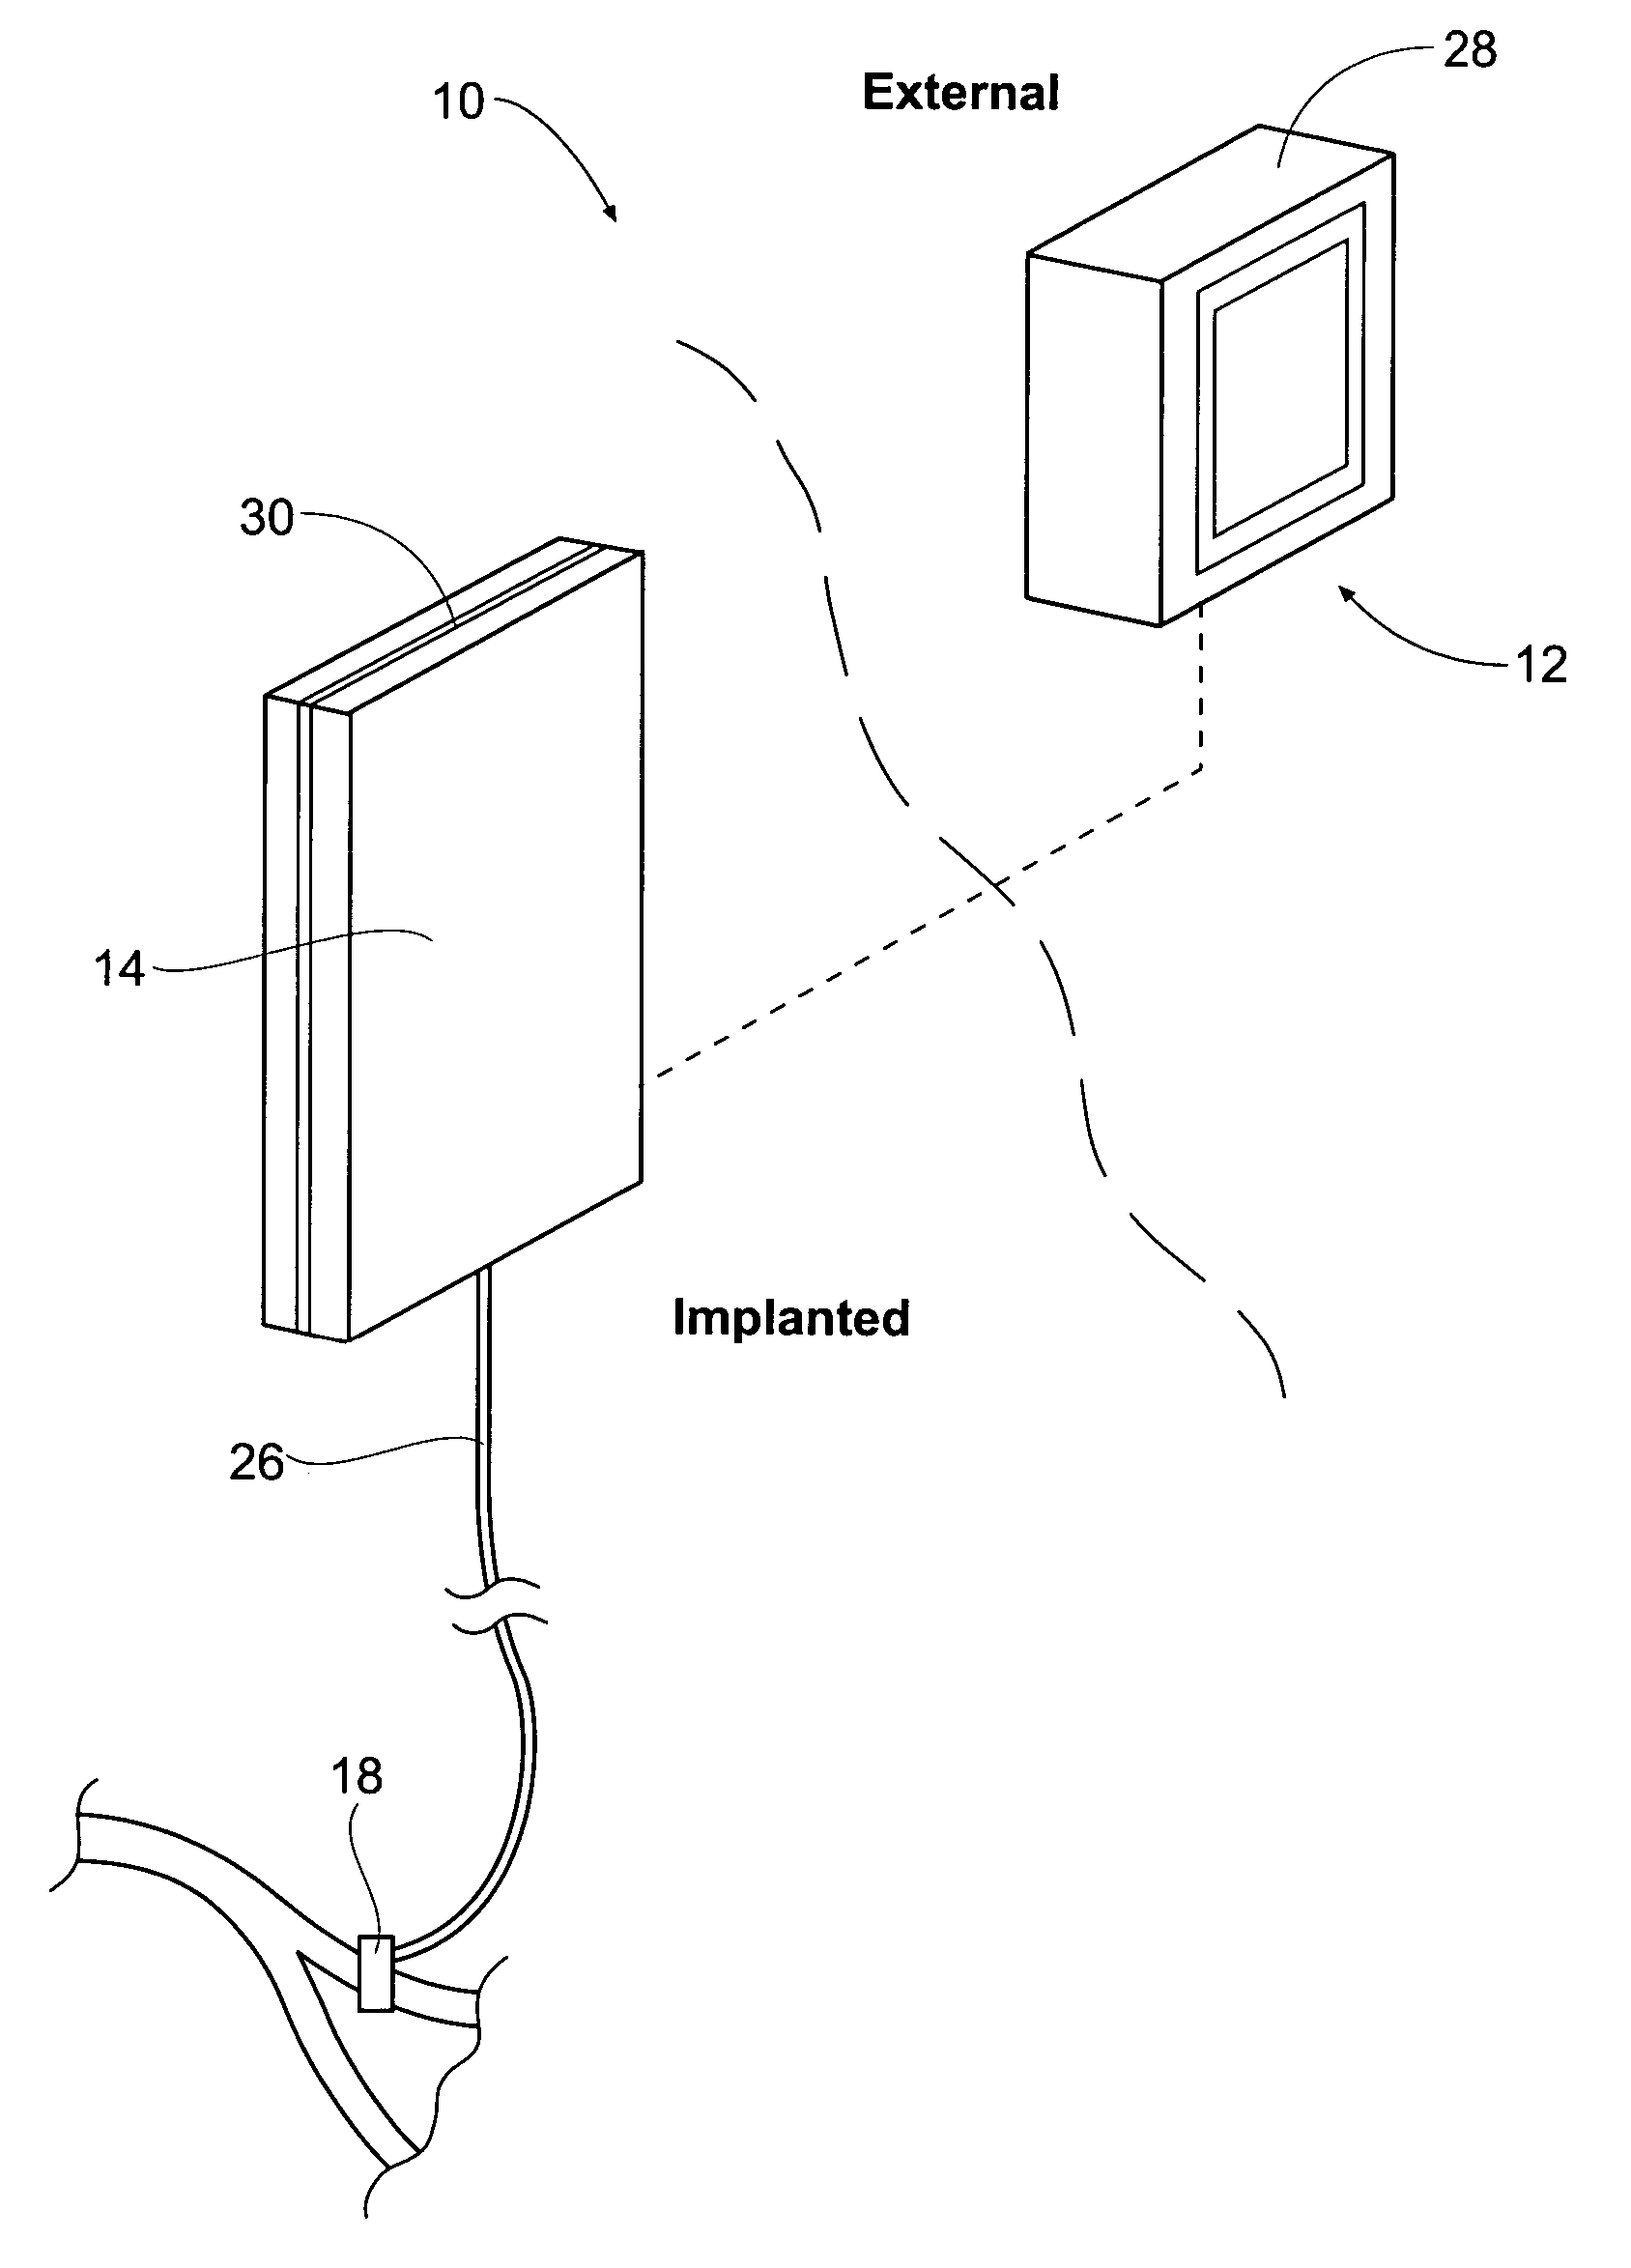 Methods for stimulating components in, on, or near the pudendal nerve or its branches to achieve selective physiologic responses